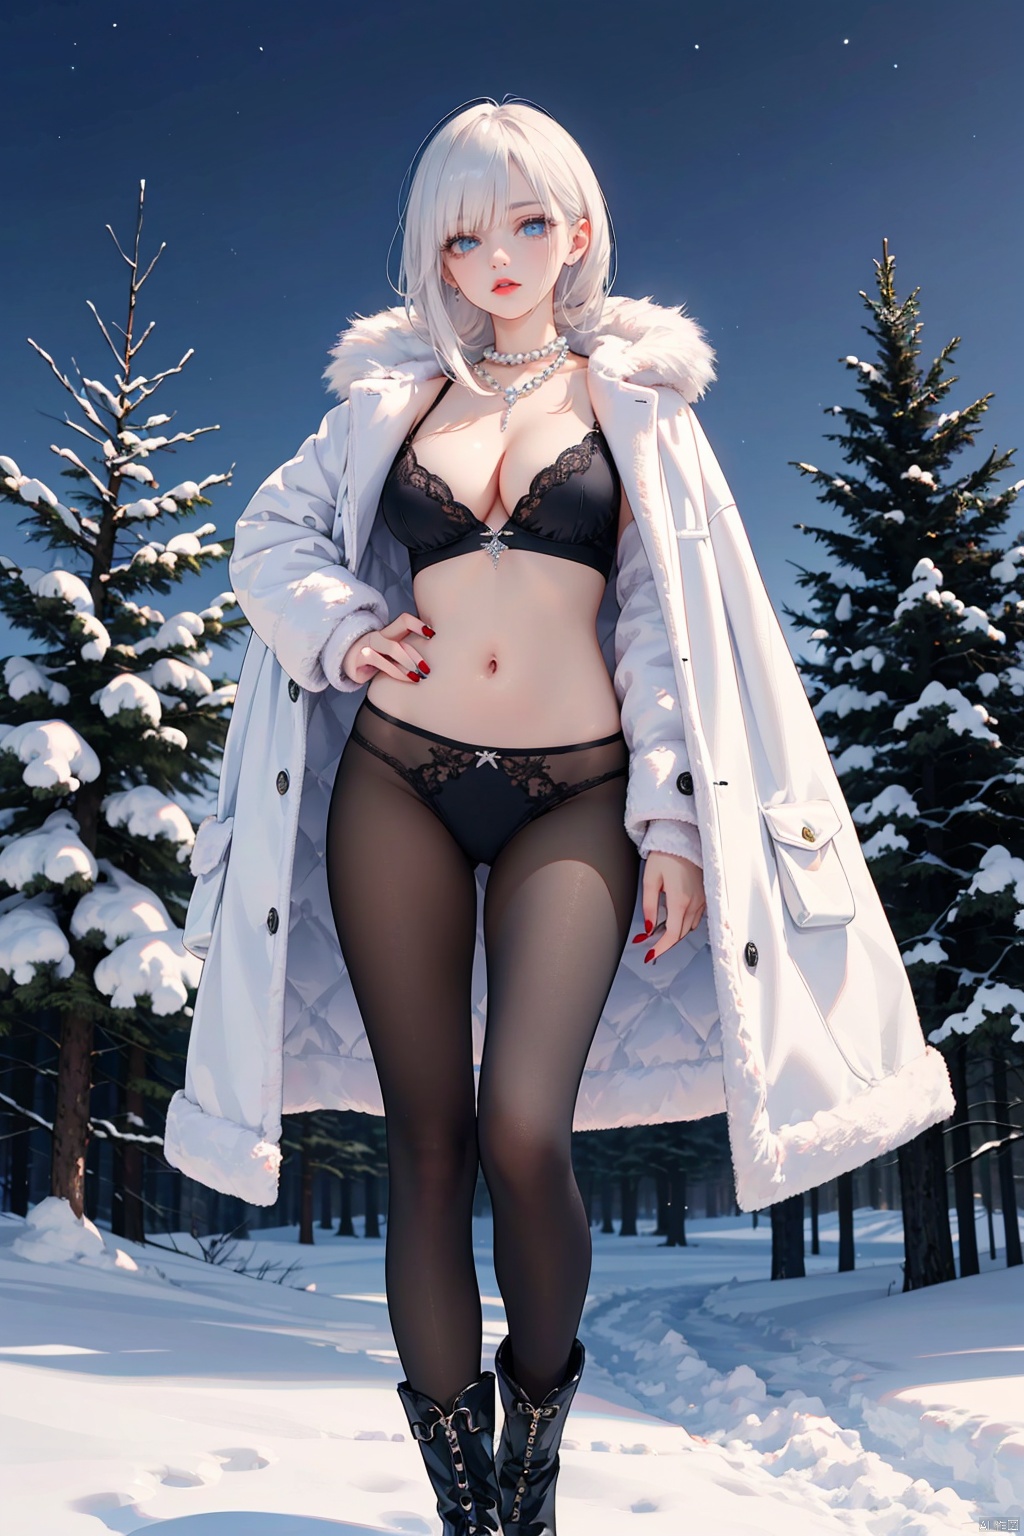 Snowy, 1girl, sexy winter clothes, pure black underwear, white fur coat, ultra-short hip skirt, long boots, red lips, (black pantyhose), messy snowflake hair, seductive eyes, long eyelashes , standing, panoramic.Pearls around the neck, icy blue eyes, fur shawl, shiny nails, snowy pine trees, moonlit night, hint of cleavage, icy breath, glittering sequins, provocative gestures, dramatic lights, forest, cold The contrast between cold air and warm and cold elements